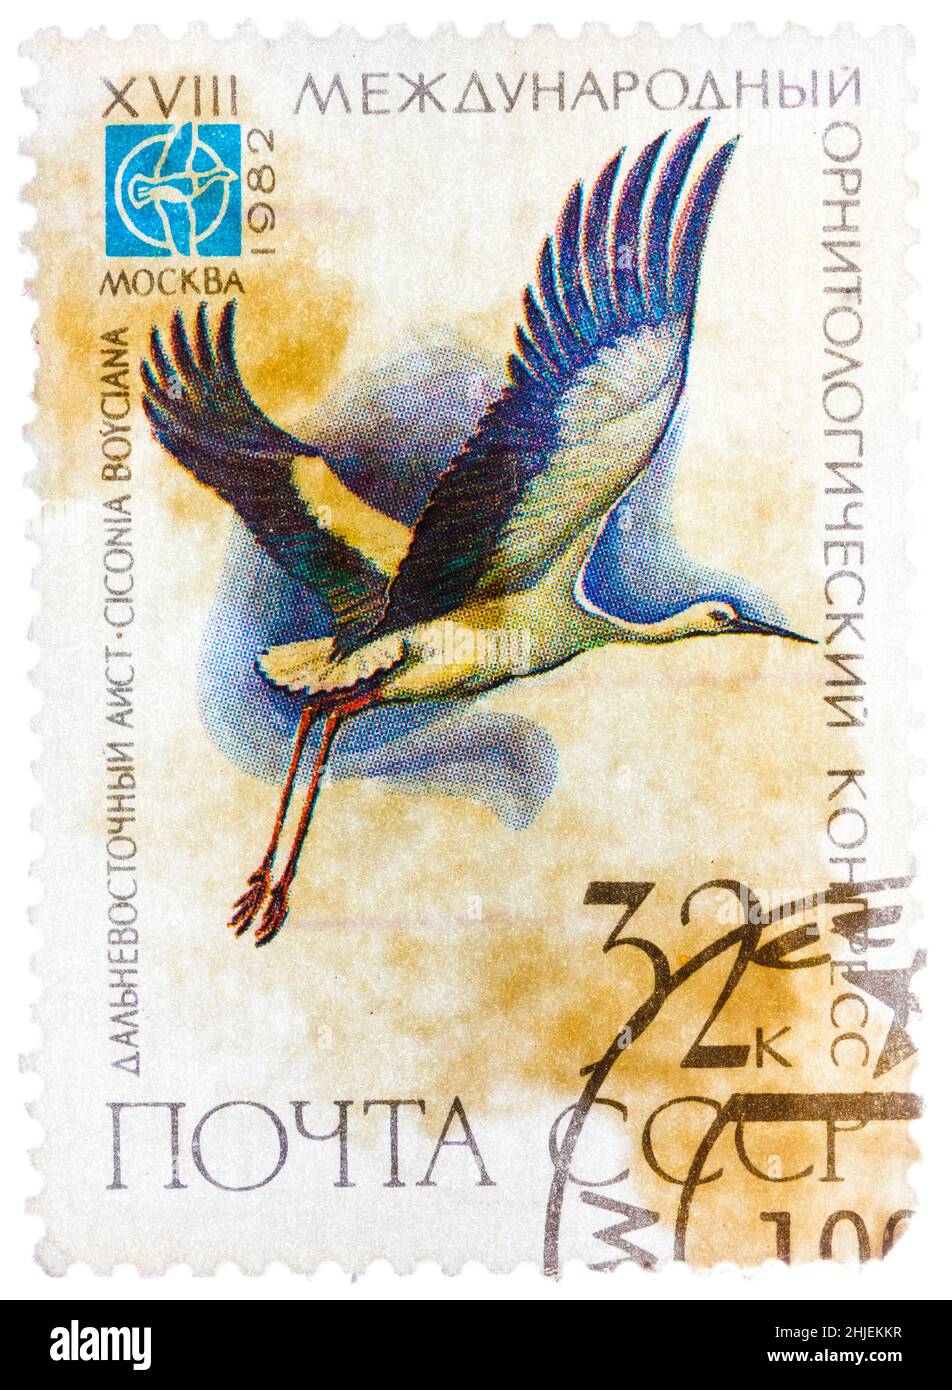 Stamp printed in USSR (Russia) shows a bird Ciconia boyciana with the inscription and name of series 'XVIII International Ornithological Congress Stock Photo